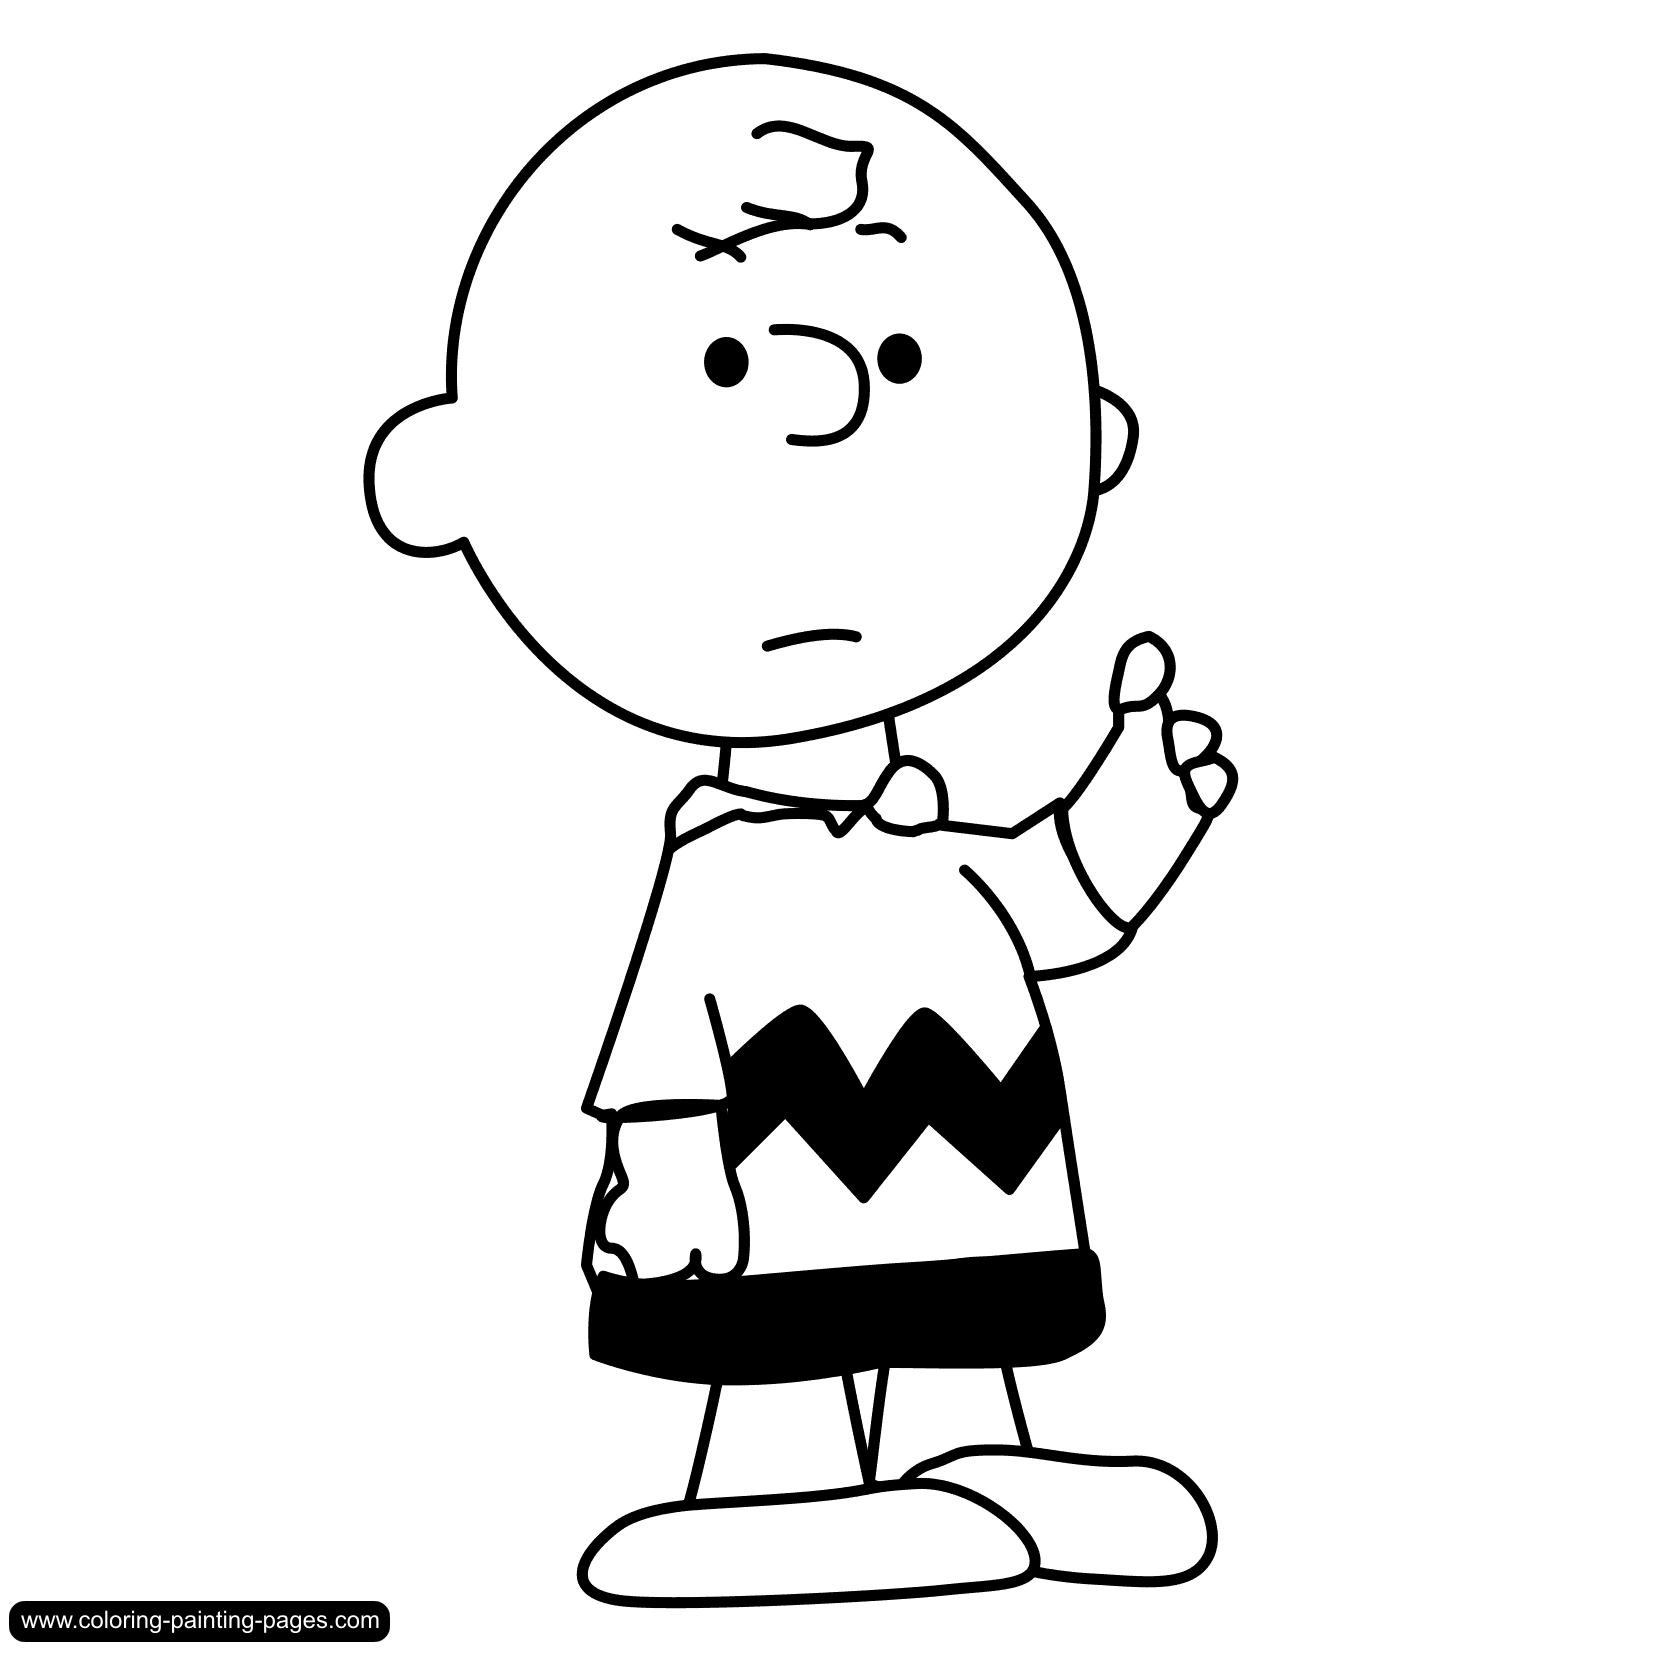 Charlie Brown Characters Clip